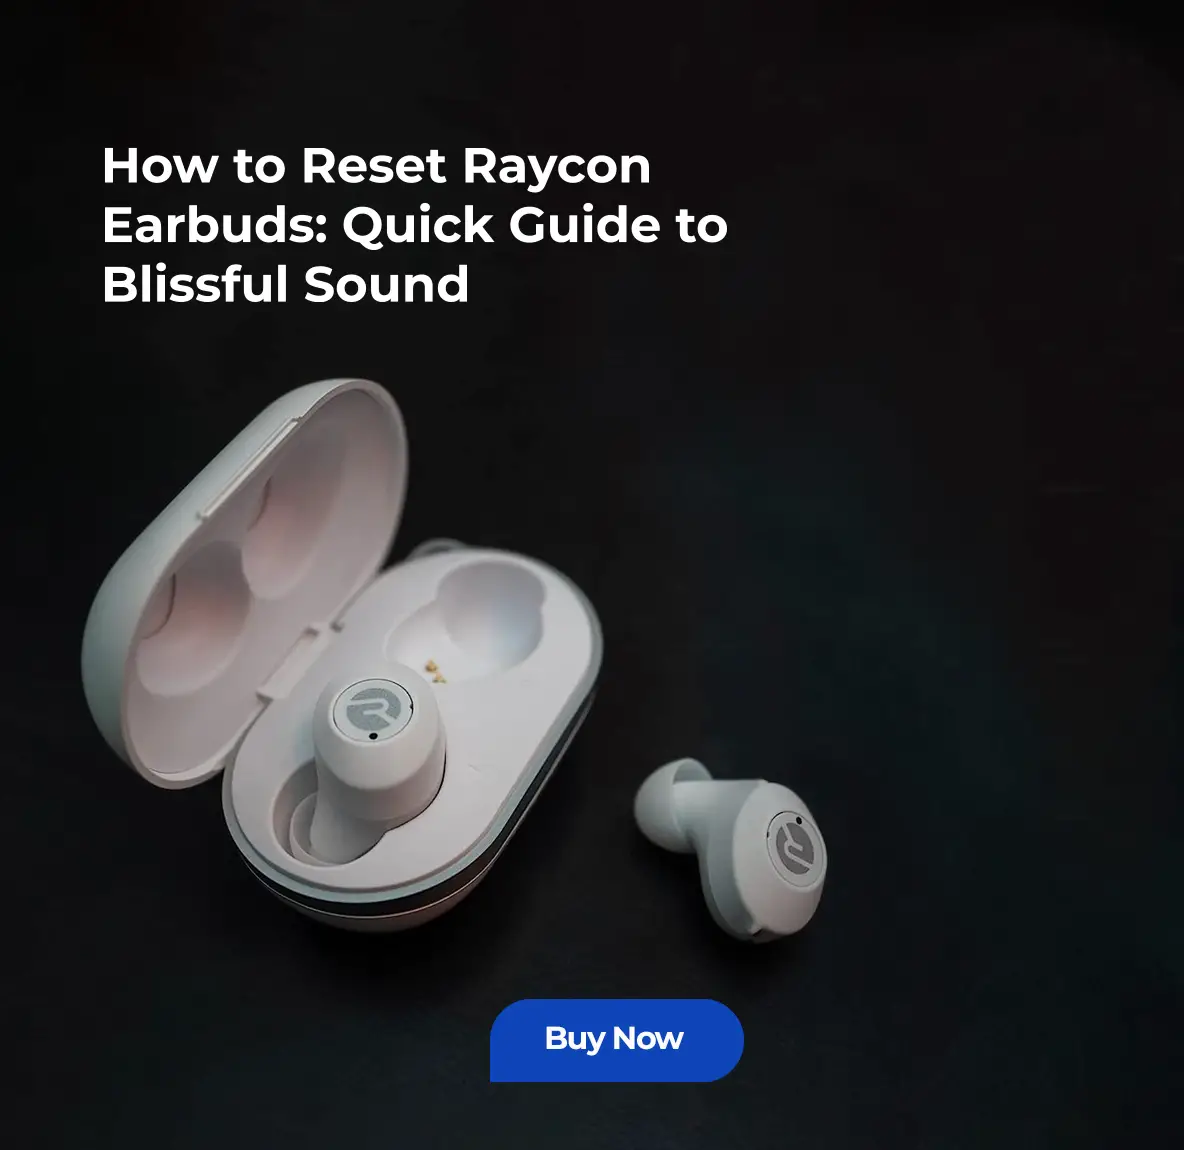 How to Reset Raycon Earbuds image 1 Techie Trickle